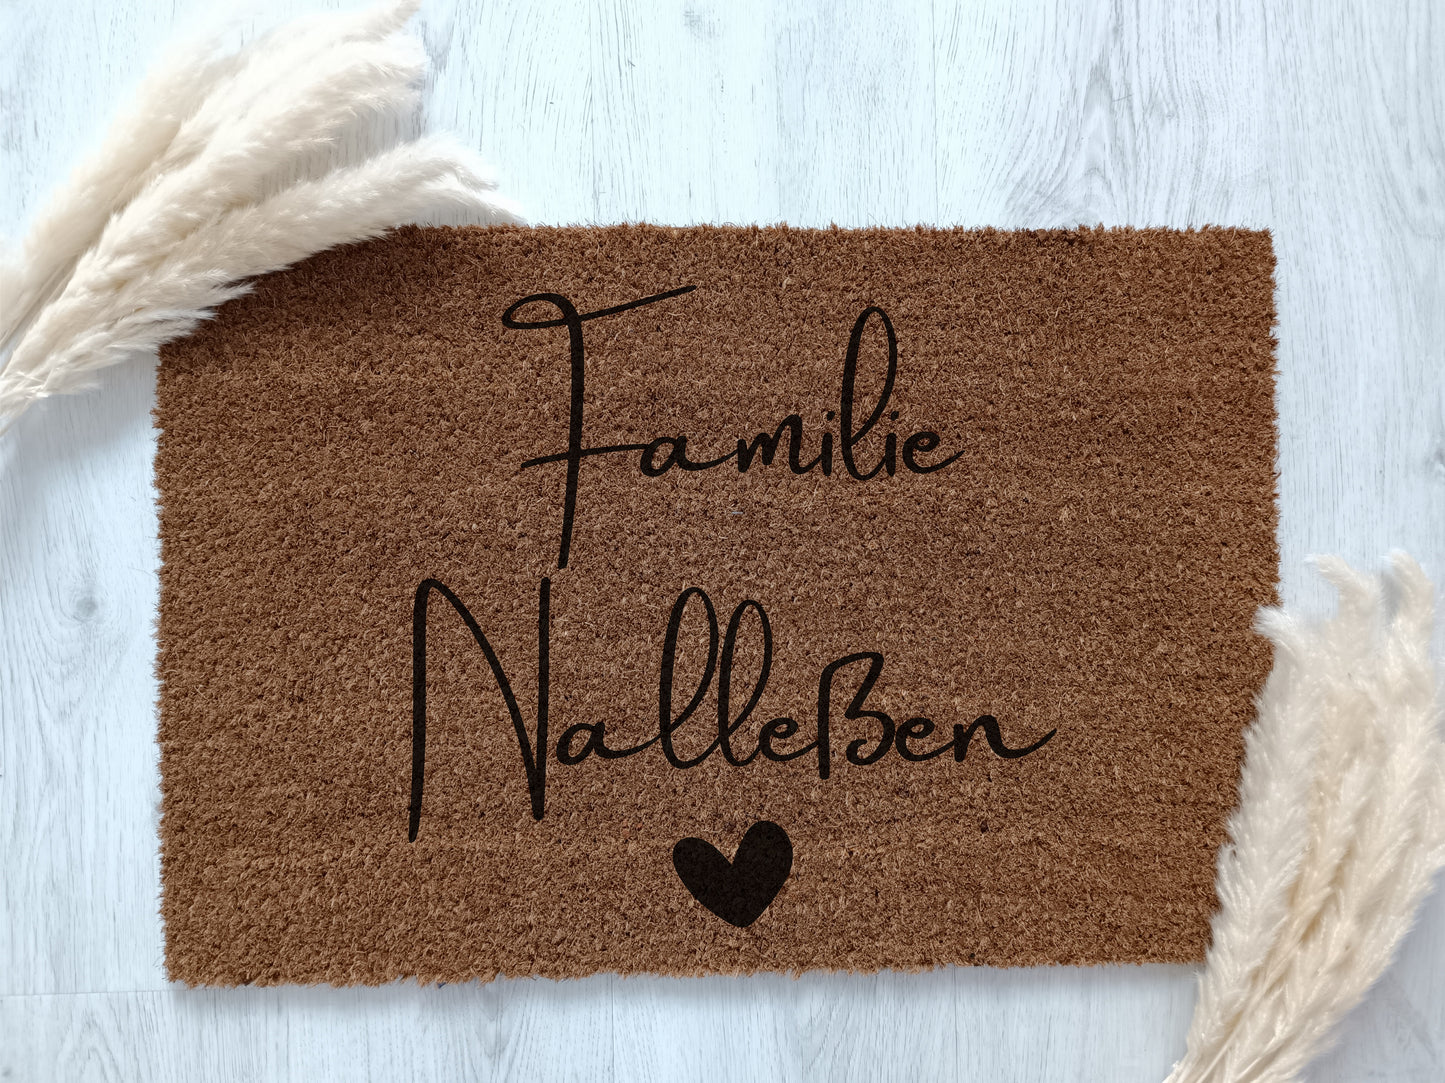 Personalized doormat with your name made of coconut